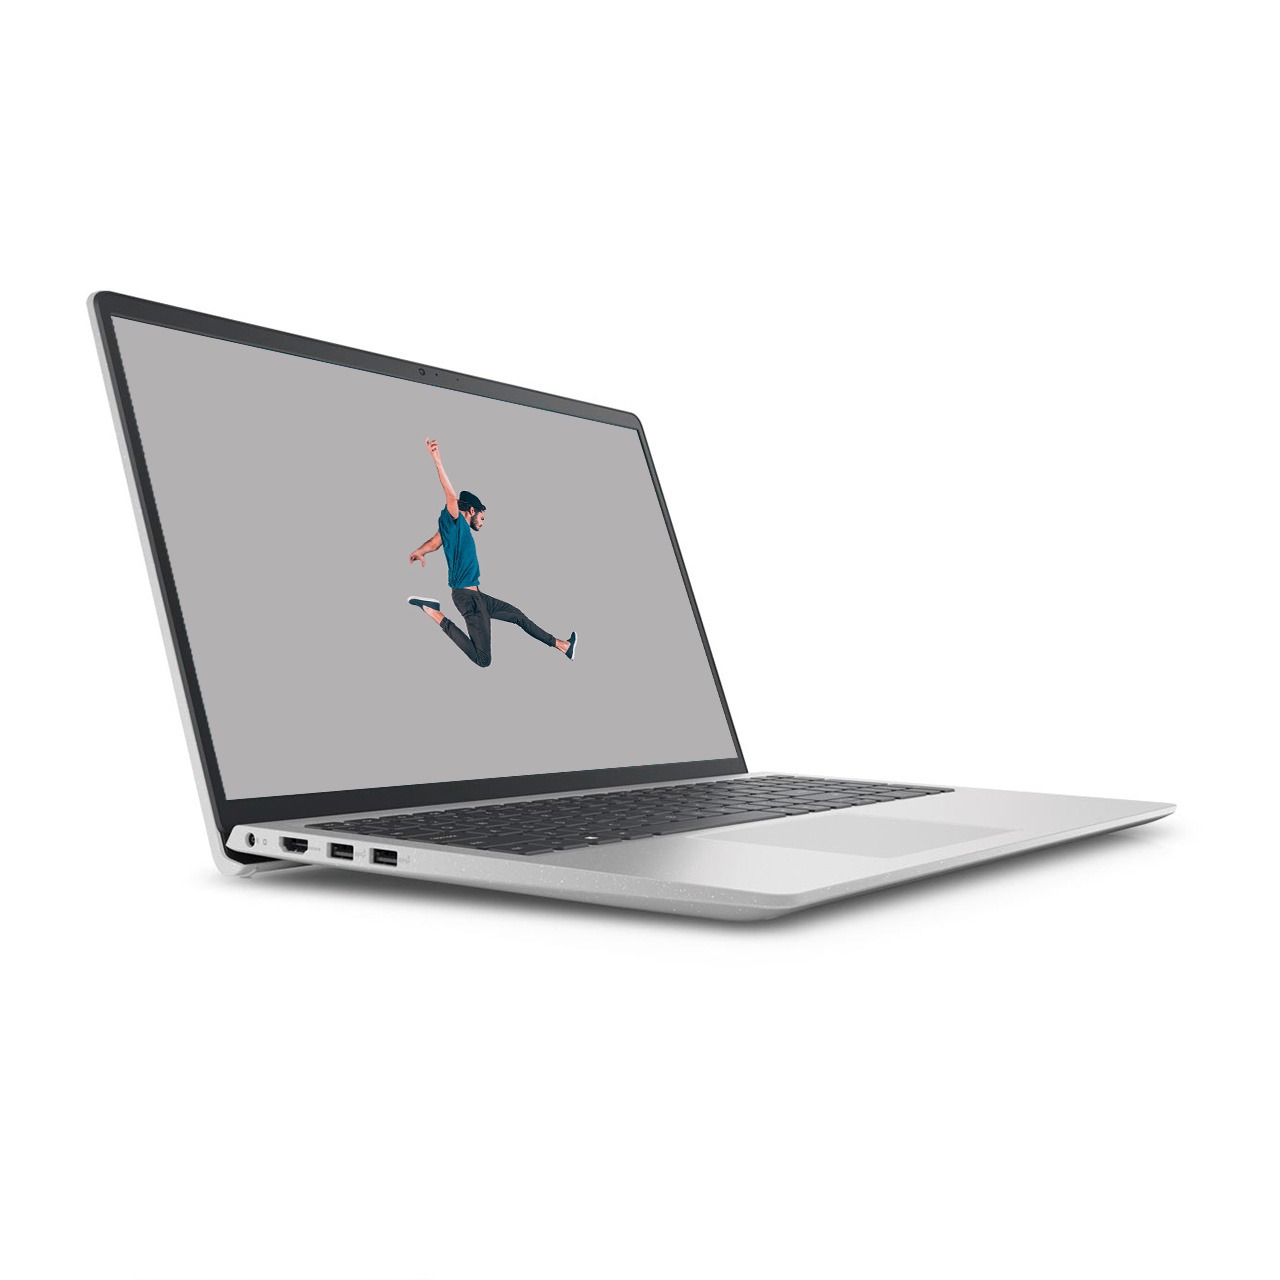 Refurbished Laptops and 2-in-1 PCs: Dell Outlet | Dell United States